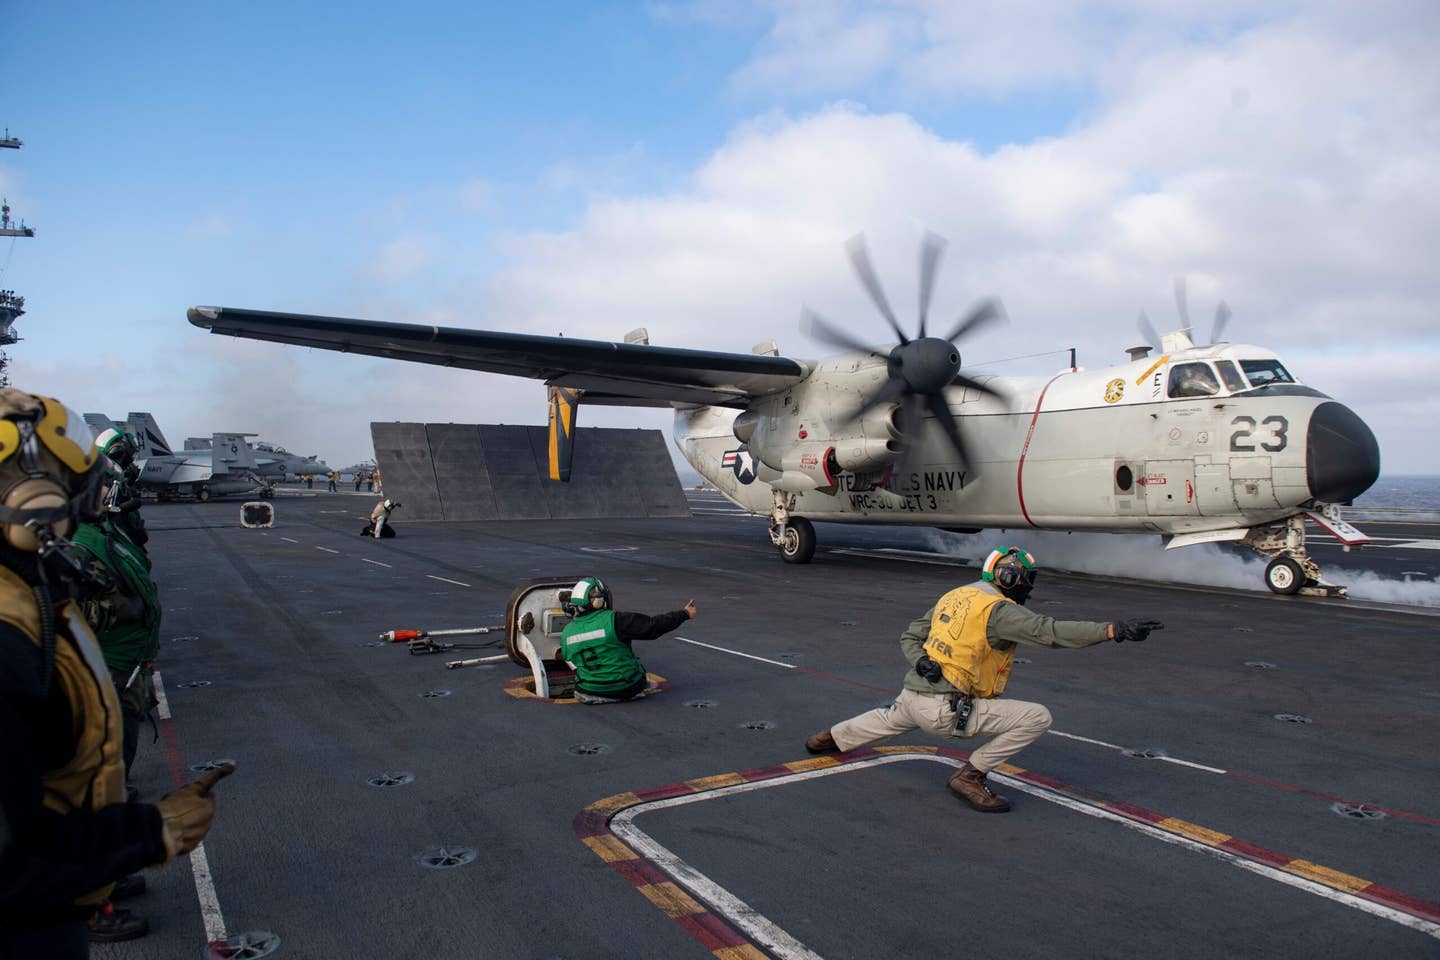 A&nbsp;C-2A&nbsp;Greyhound, assigned to the “Providers” of Fleet Logistics Support Squadron (VRC) 30, takes off from the flight deck of the aircraft carrier USS <em>Theodore&nbsp;Roosevelt</em>&nbsp;(CVN 71) July 6, 2020. (U.S. Navy photo)